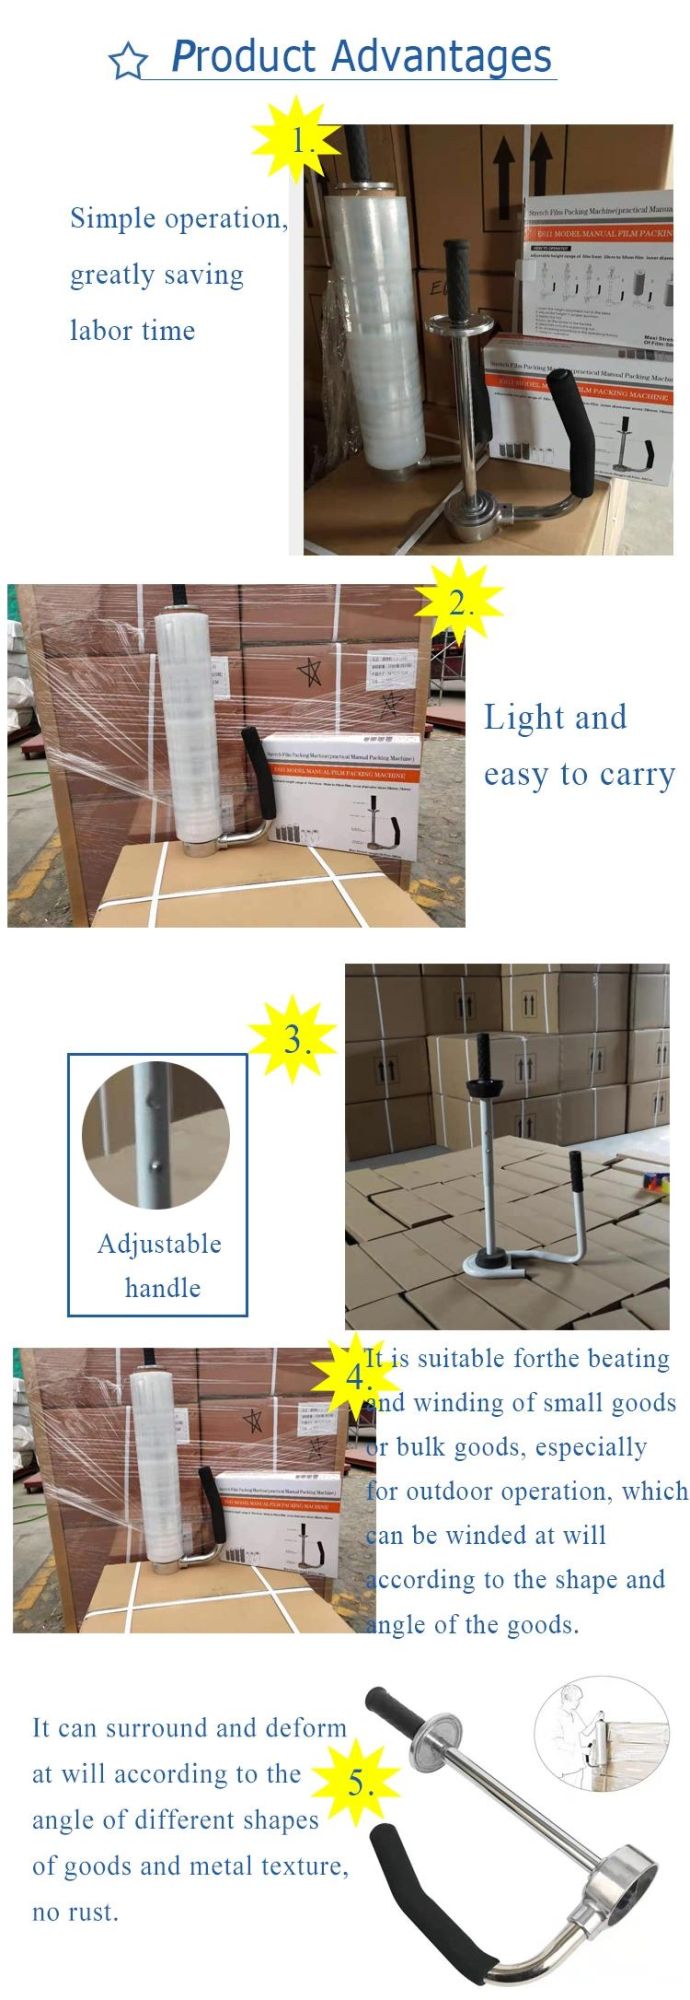 76mm Manual Stretch Film Dispenser for Pallet Wrapping